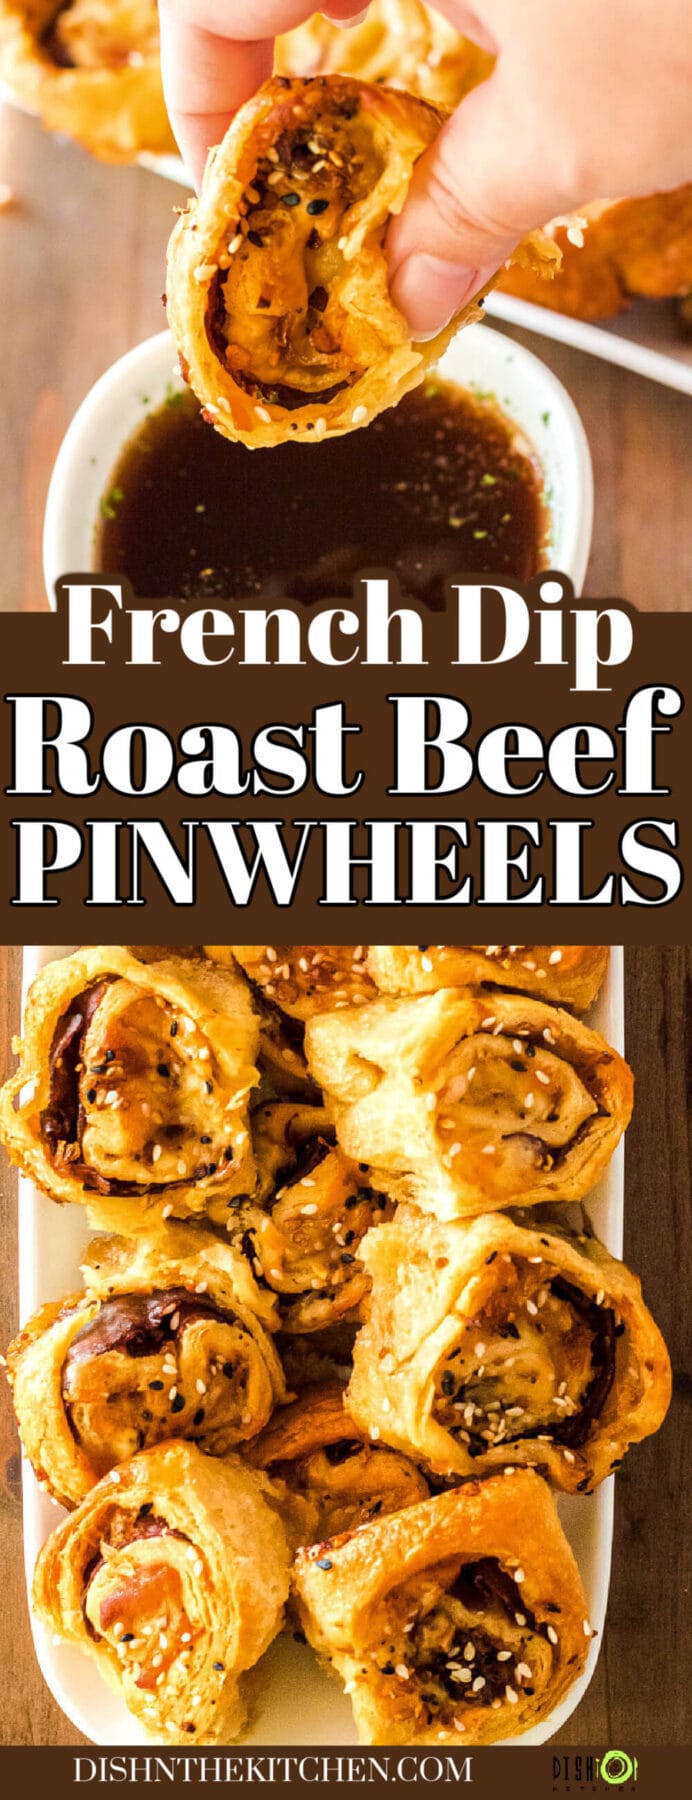 Pinterest image featuring golden baked French Dip Roast Beef Pinwheels topped with Everything bagel seasoning on a white platter.